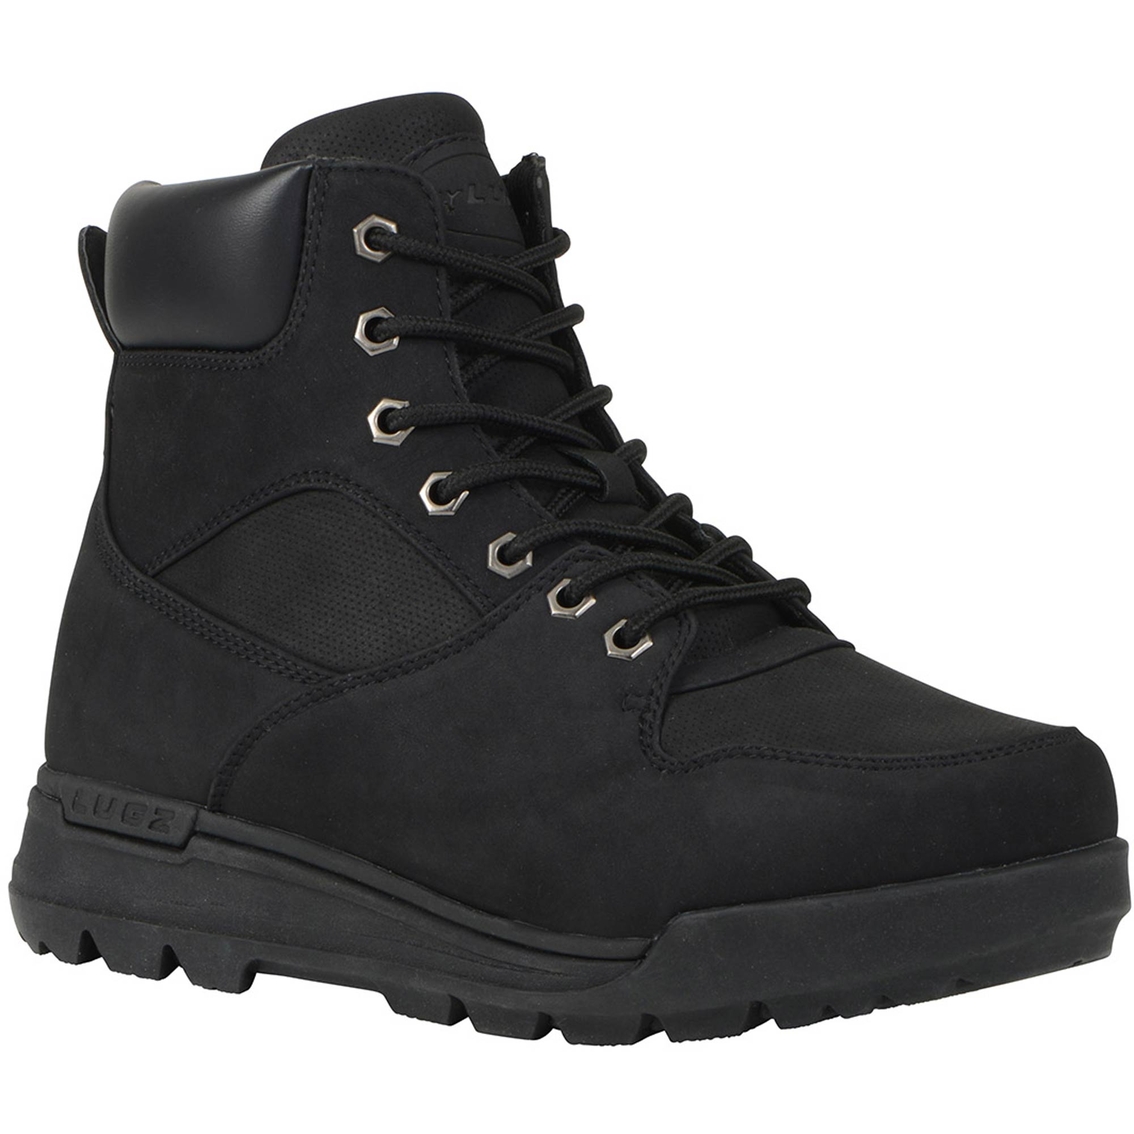 Lugz Sentry Hiking Boots | Hiking & Trail | Shoes | Shop The Exchange